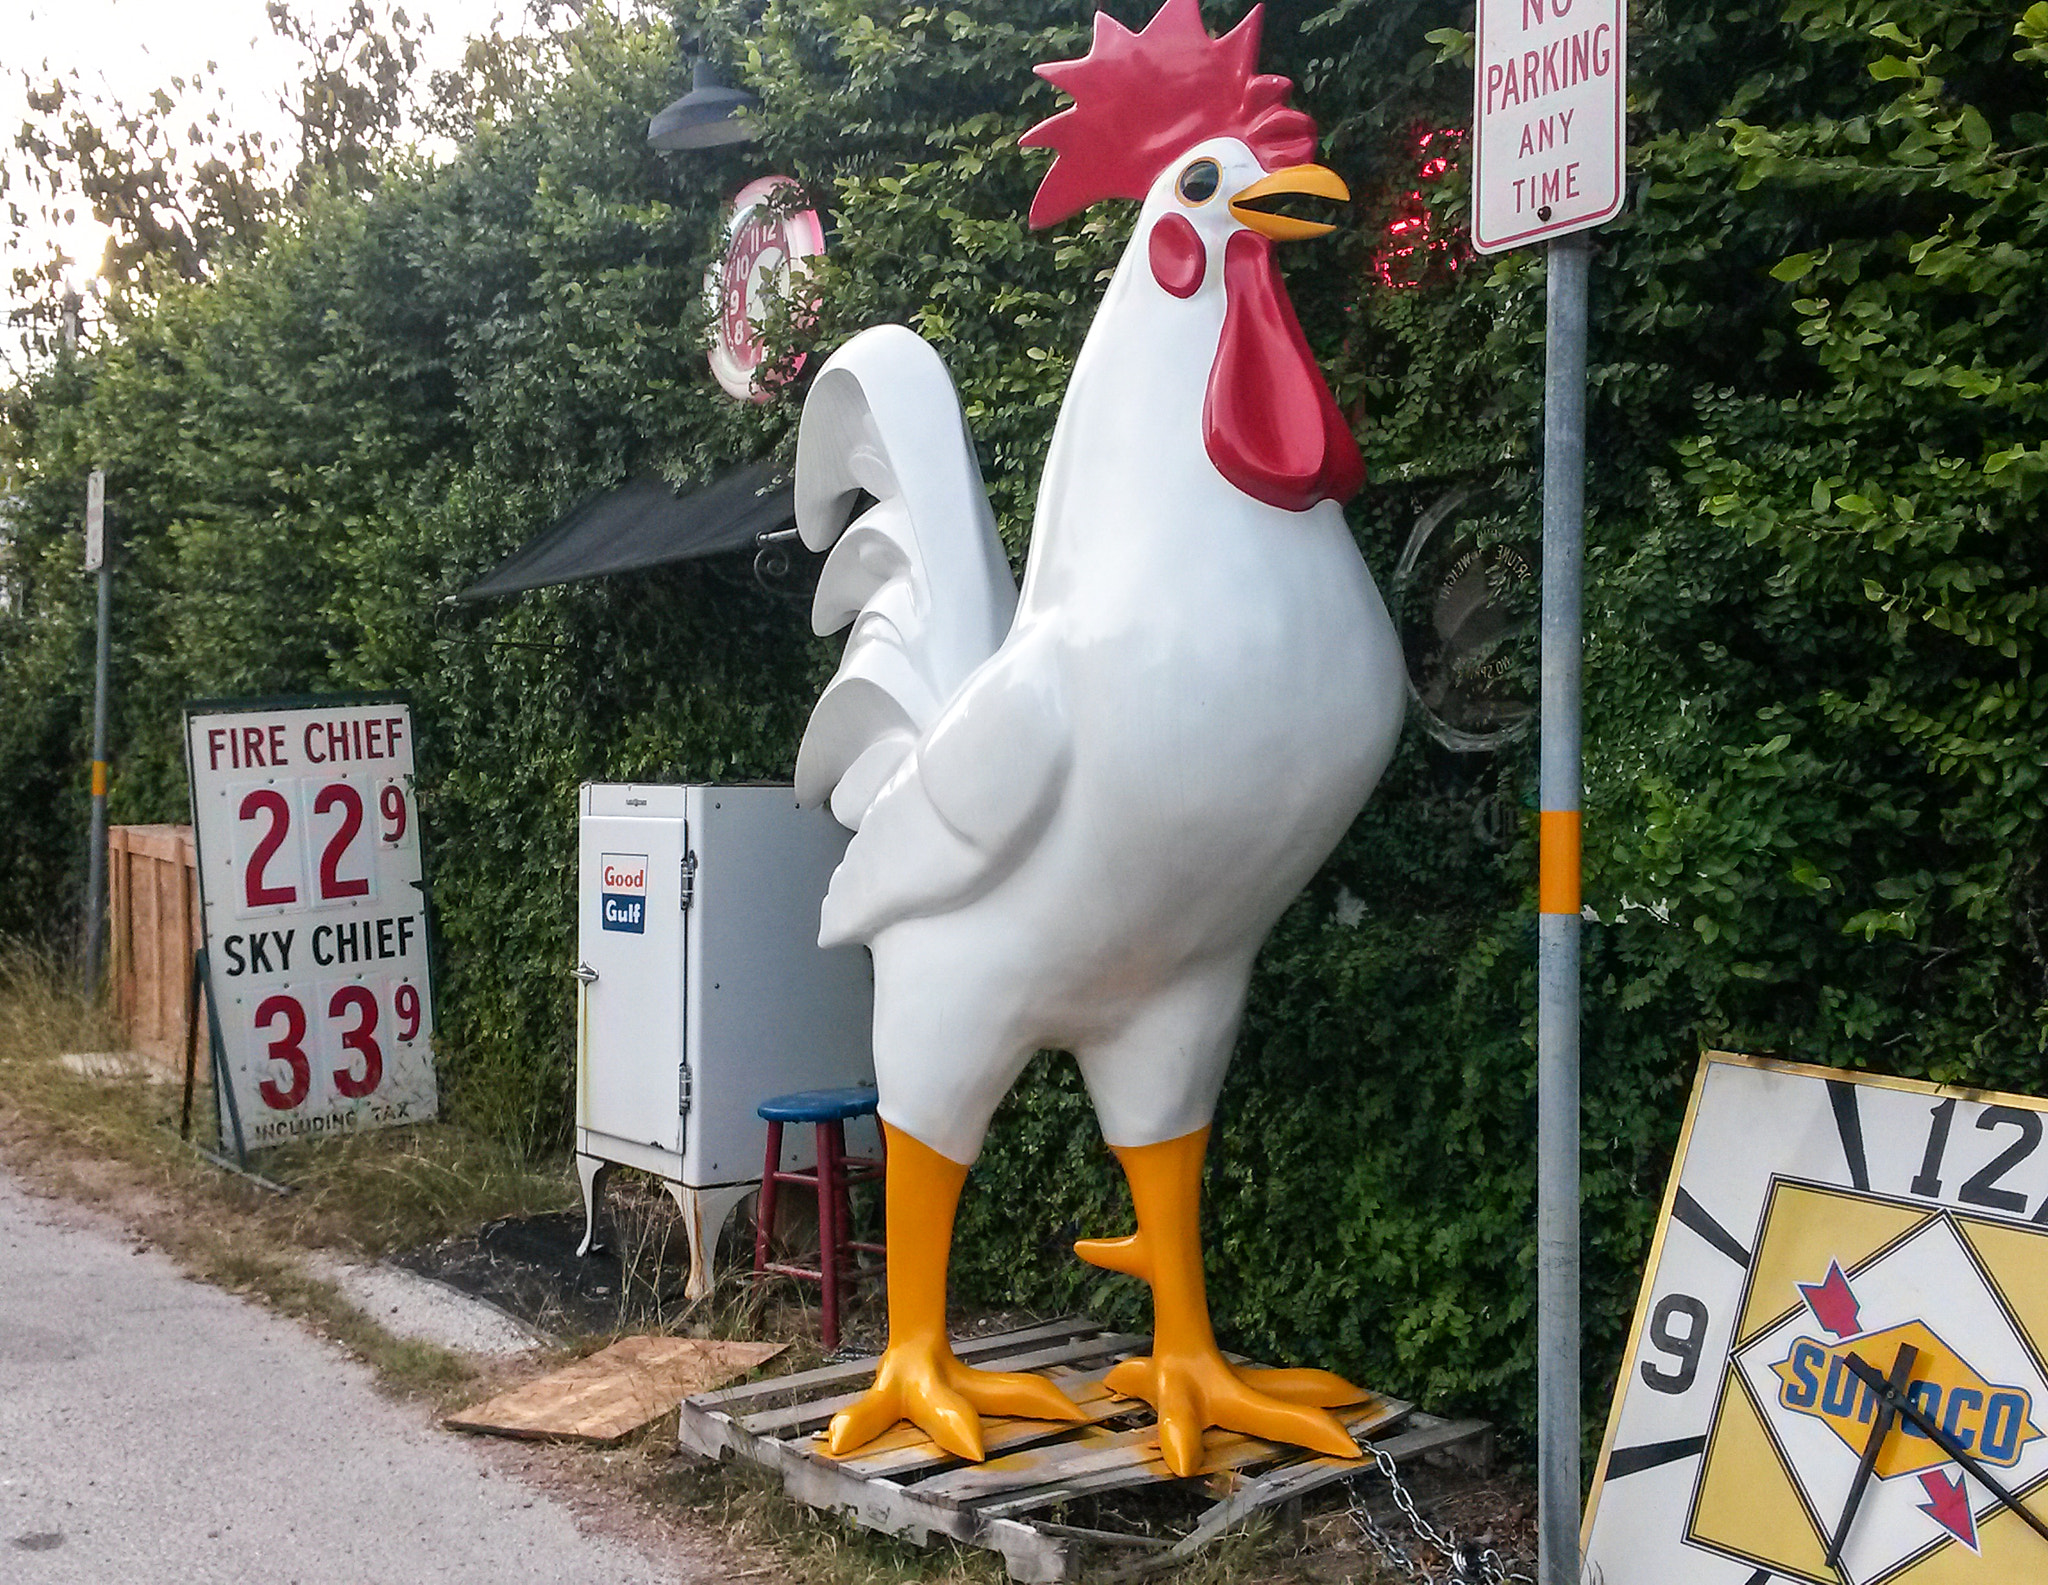 Samsung Galaxy Mega 6.3 sample photo. Free rooster parking photography